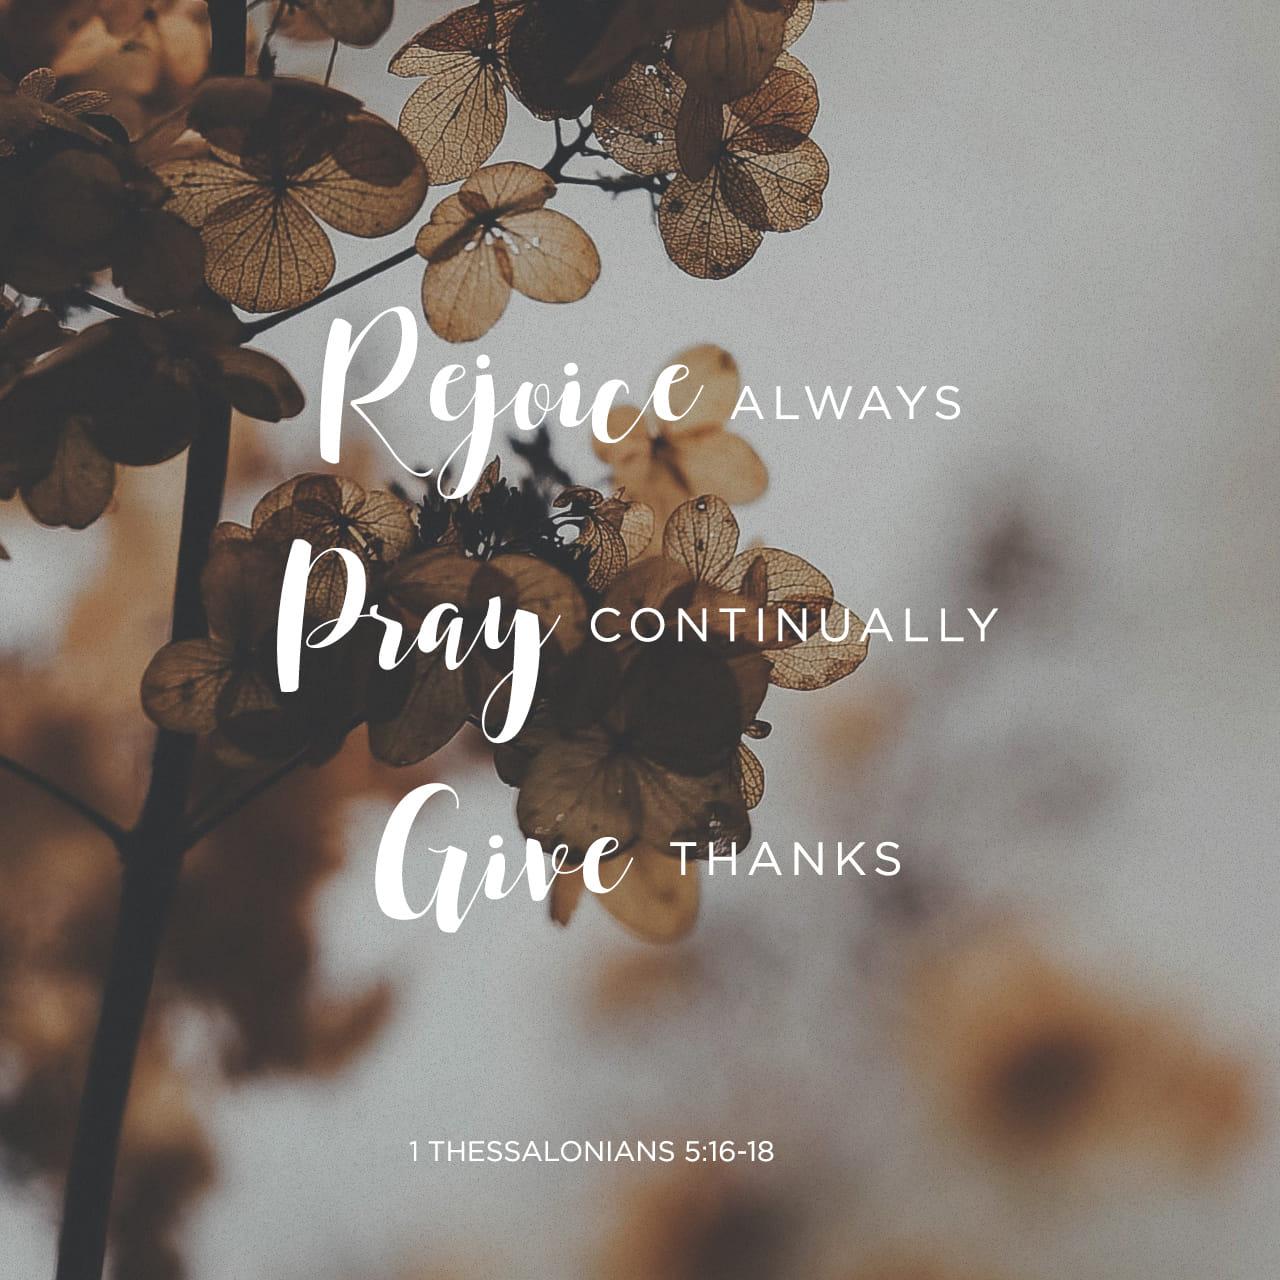 Bible verse of the day - Day 88 - image 711 (1 Thessalonians 5:18)